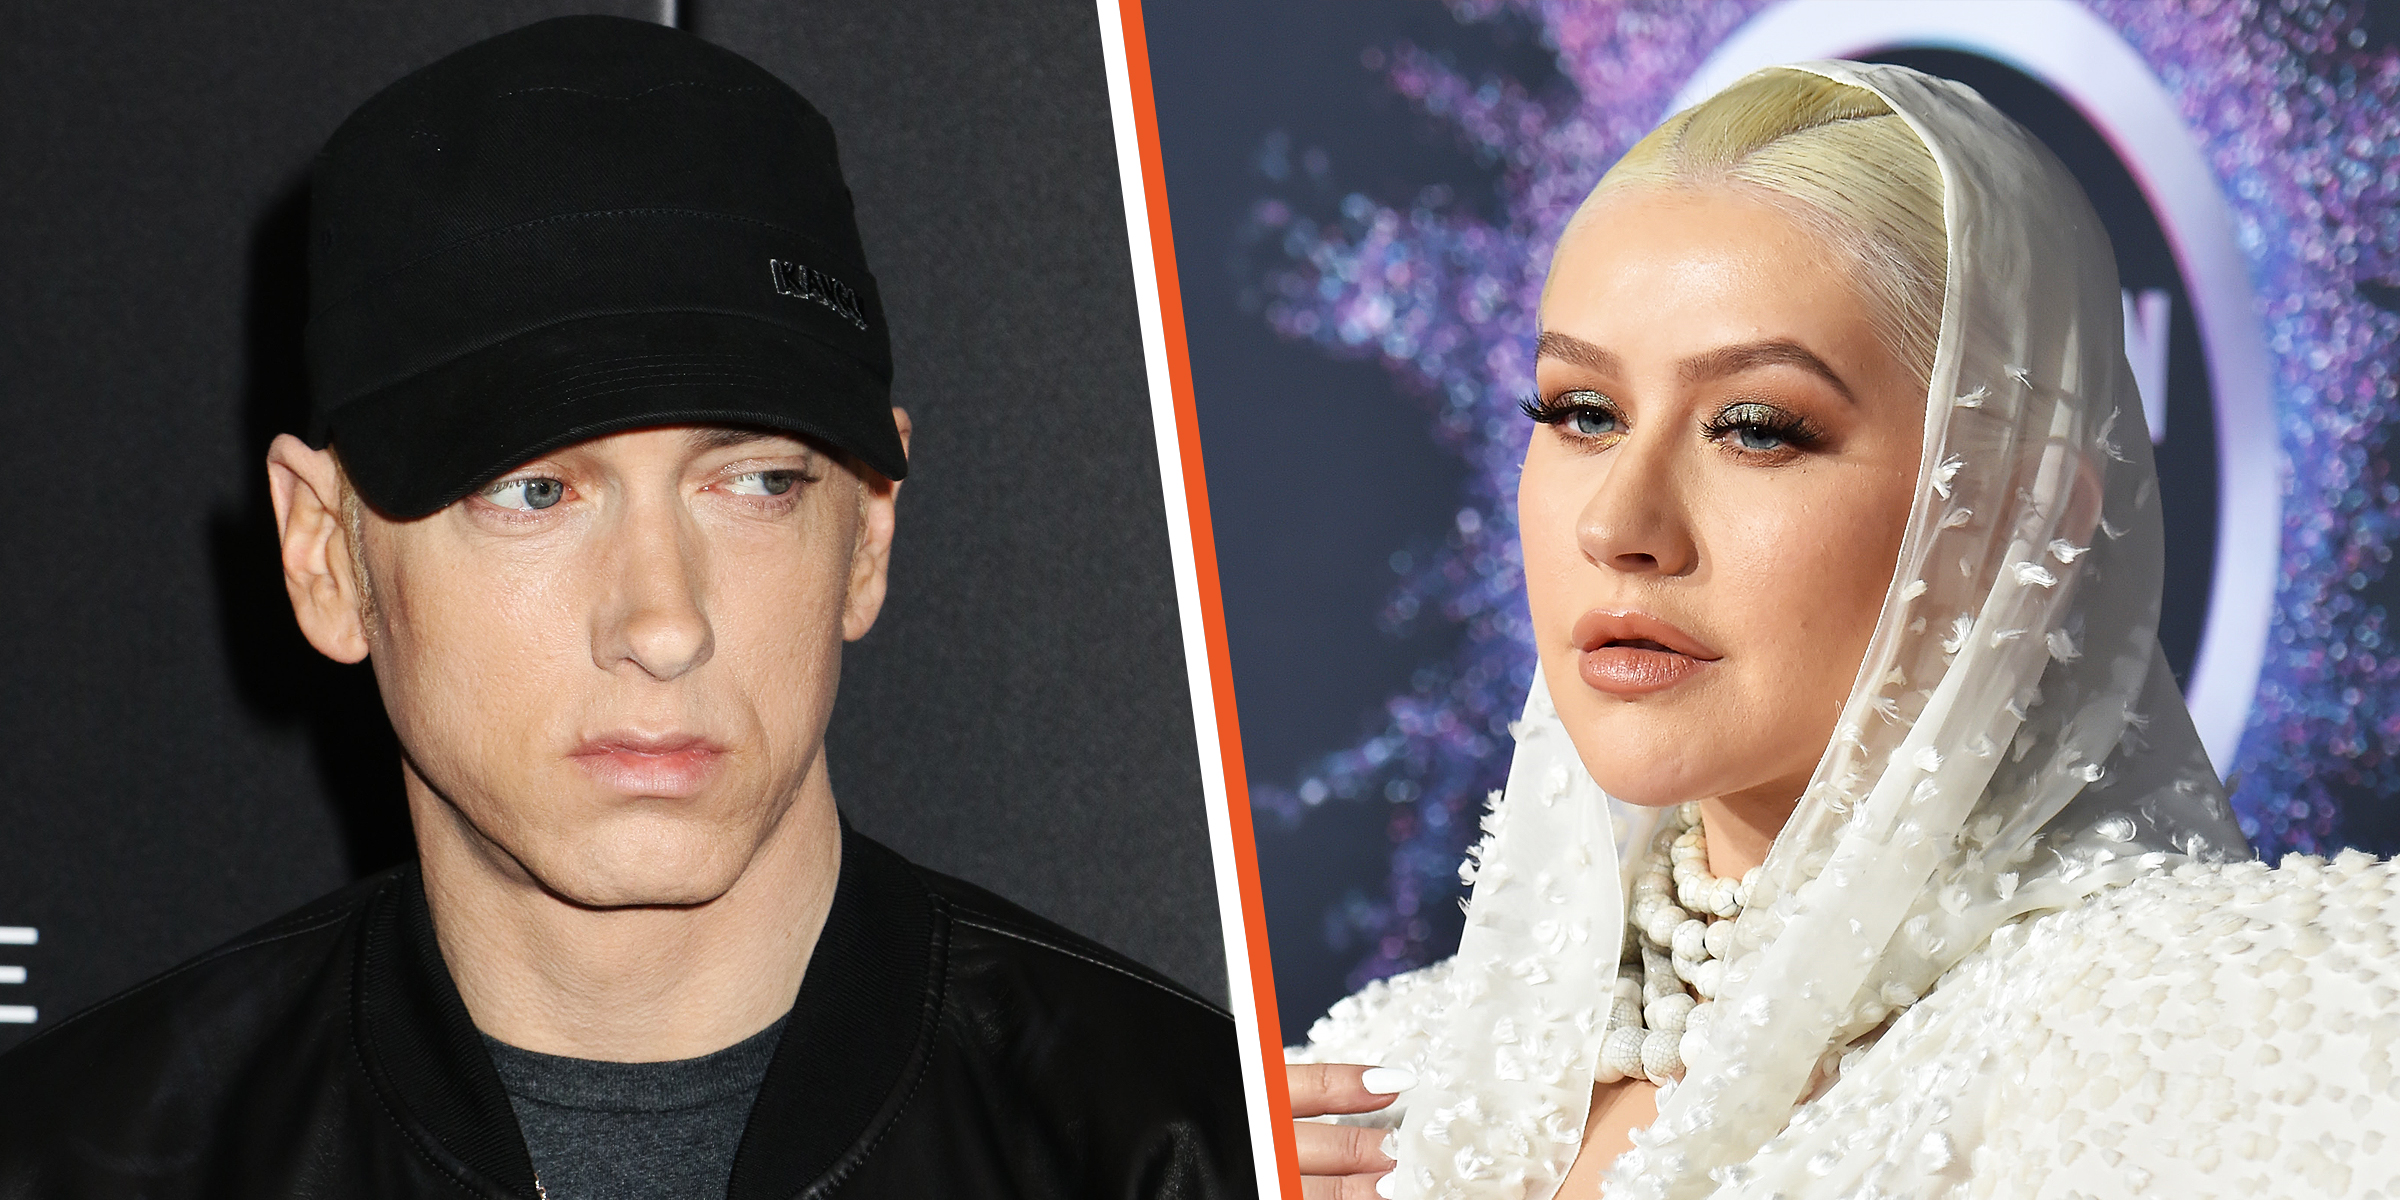 Eminem and Christina Aguilera. | Source: Getty Images